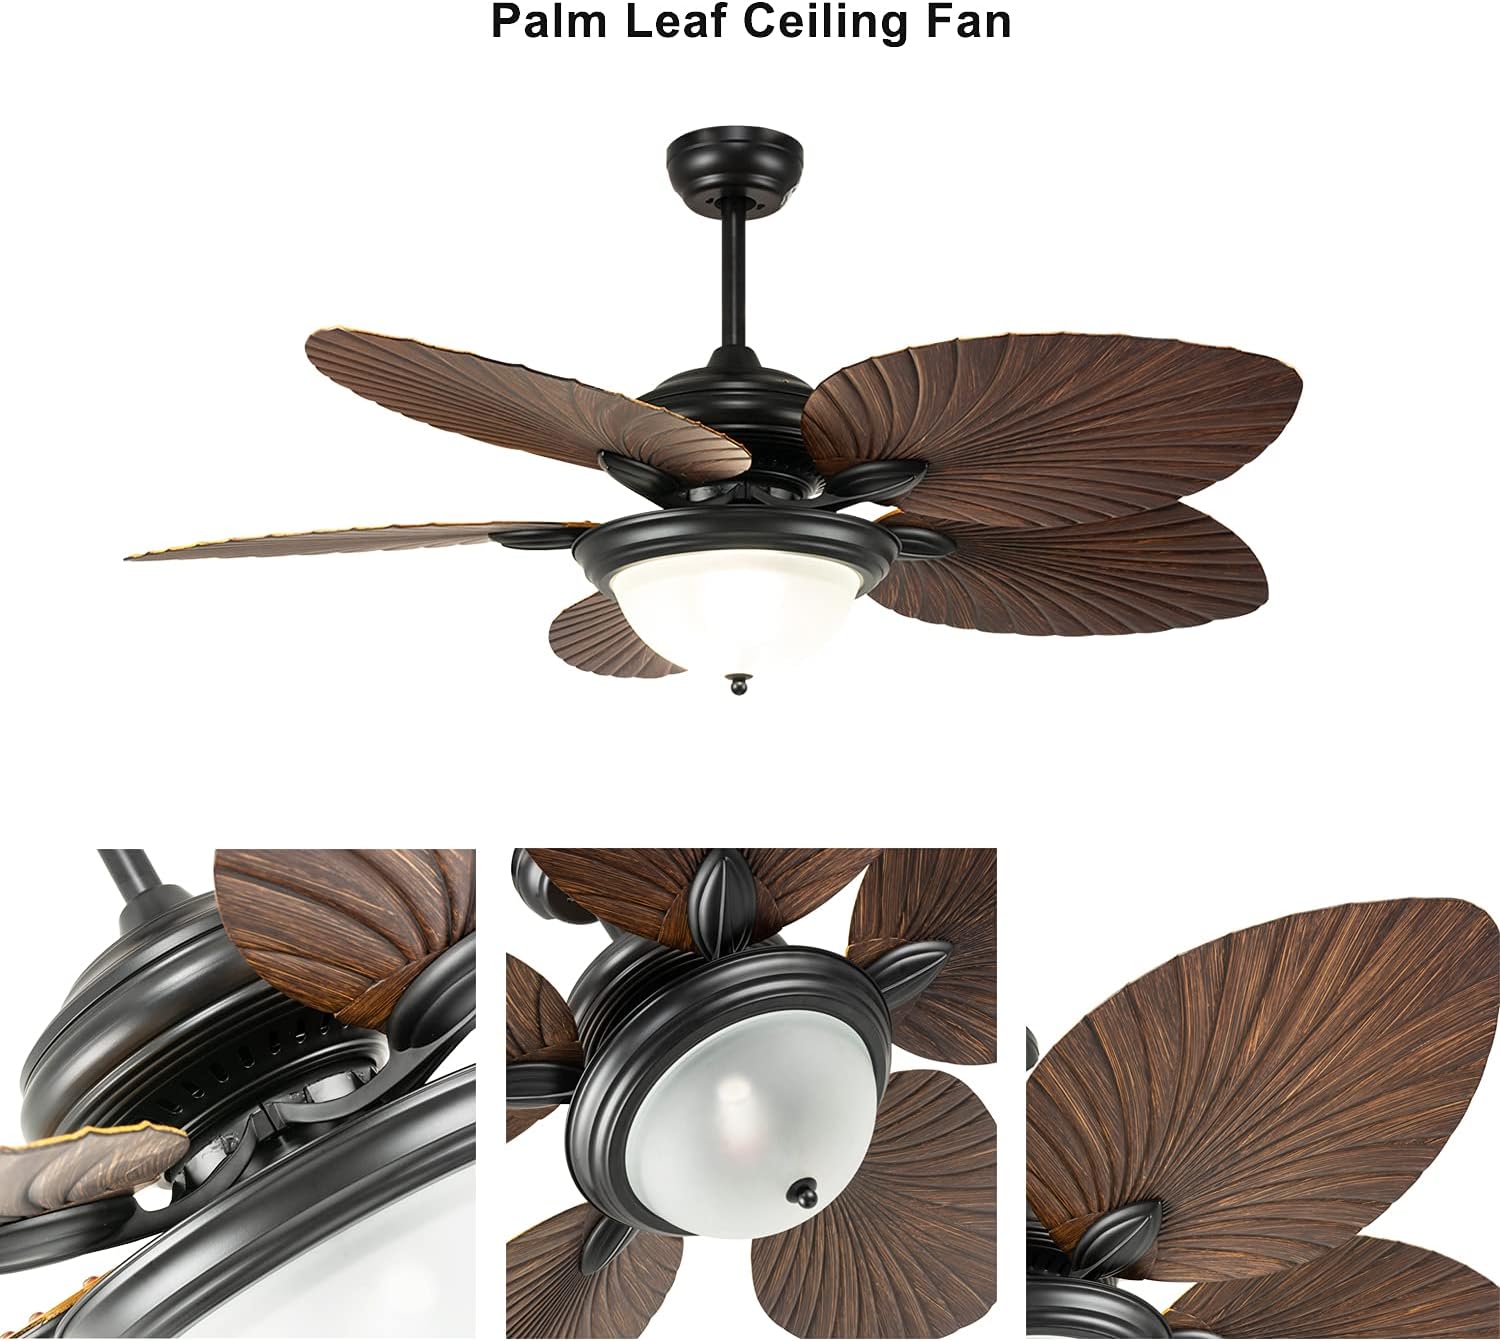 Whmetal cover Tropical Ceiling Fans with Lights - $125